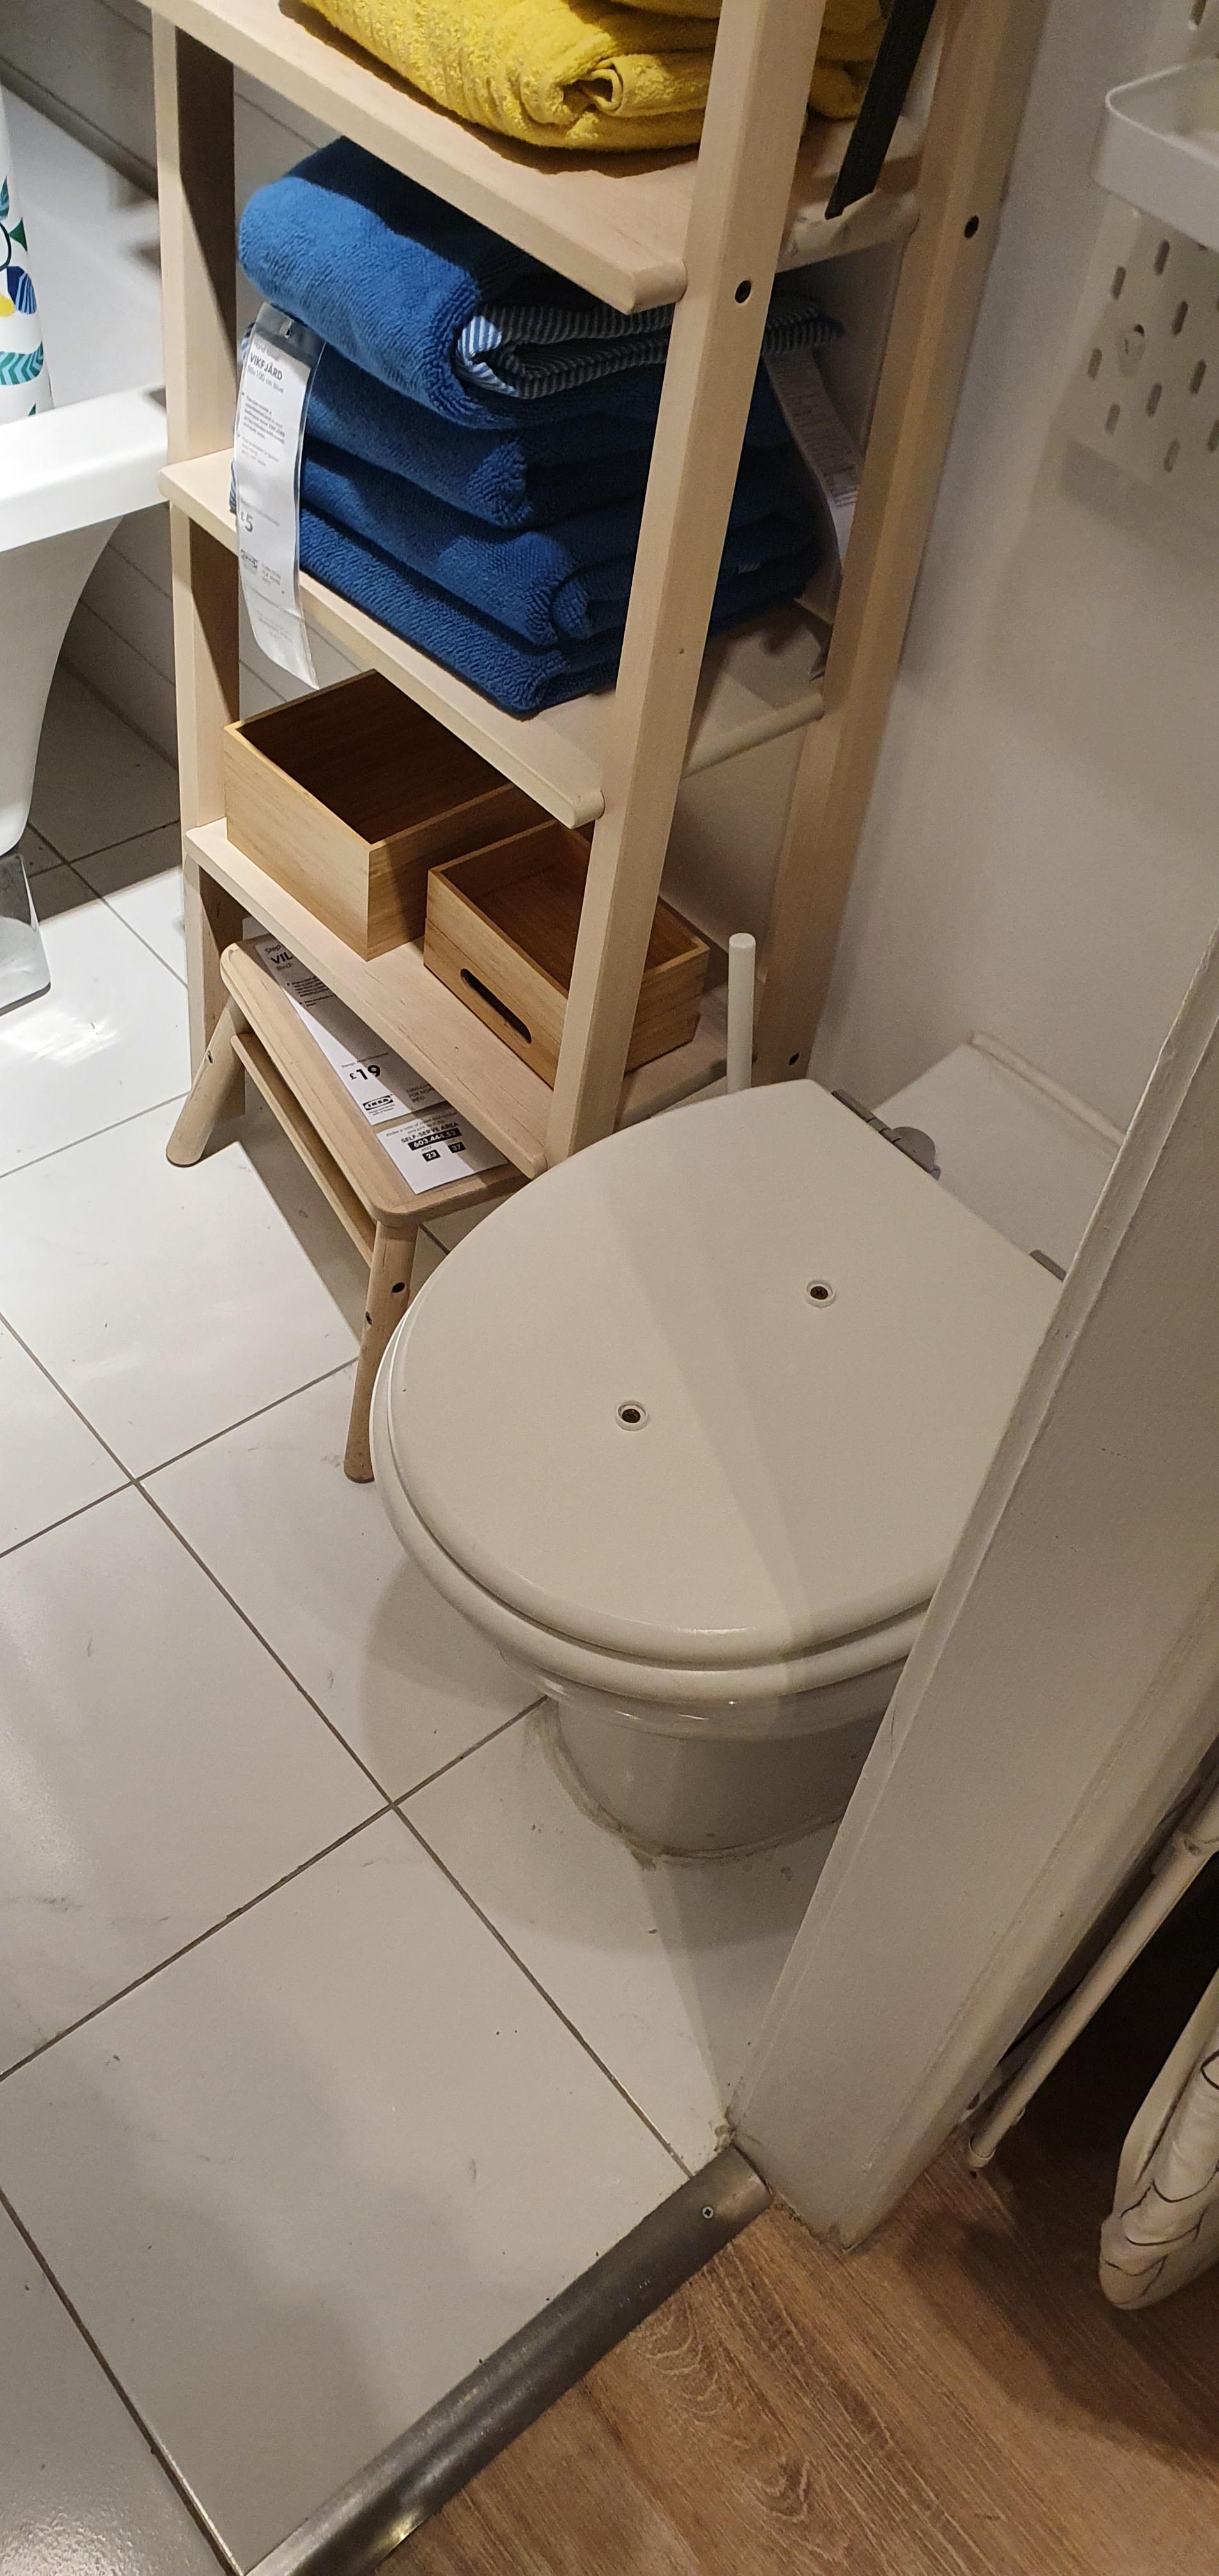 IKEA bolts down their toilets to stop people from pooping in the showrooms.